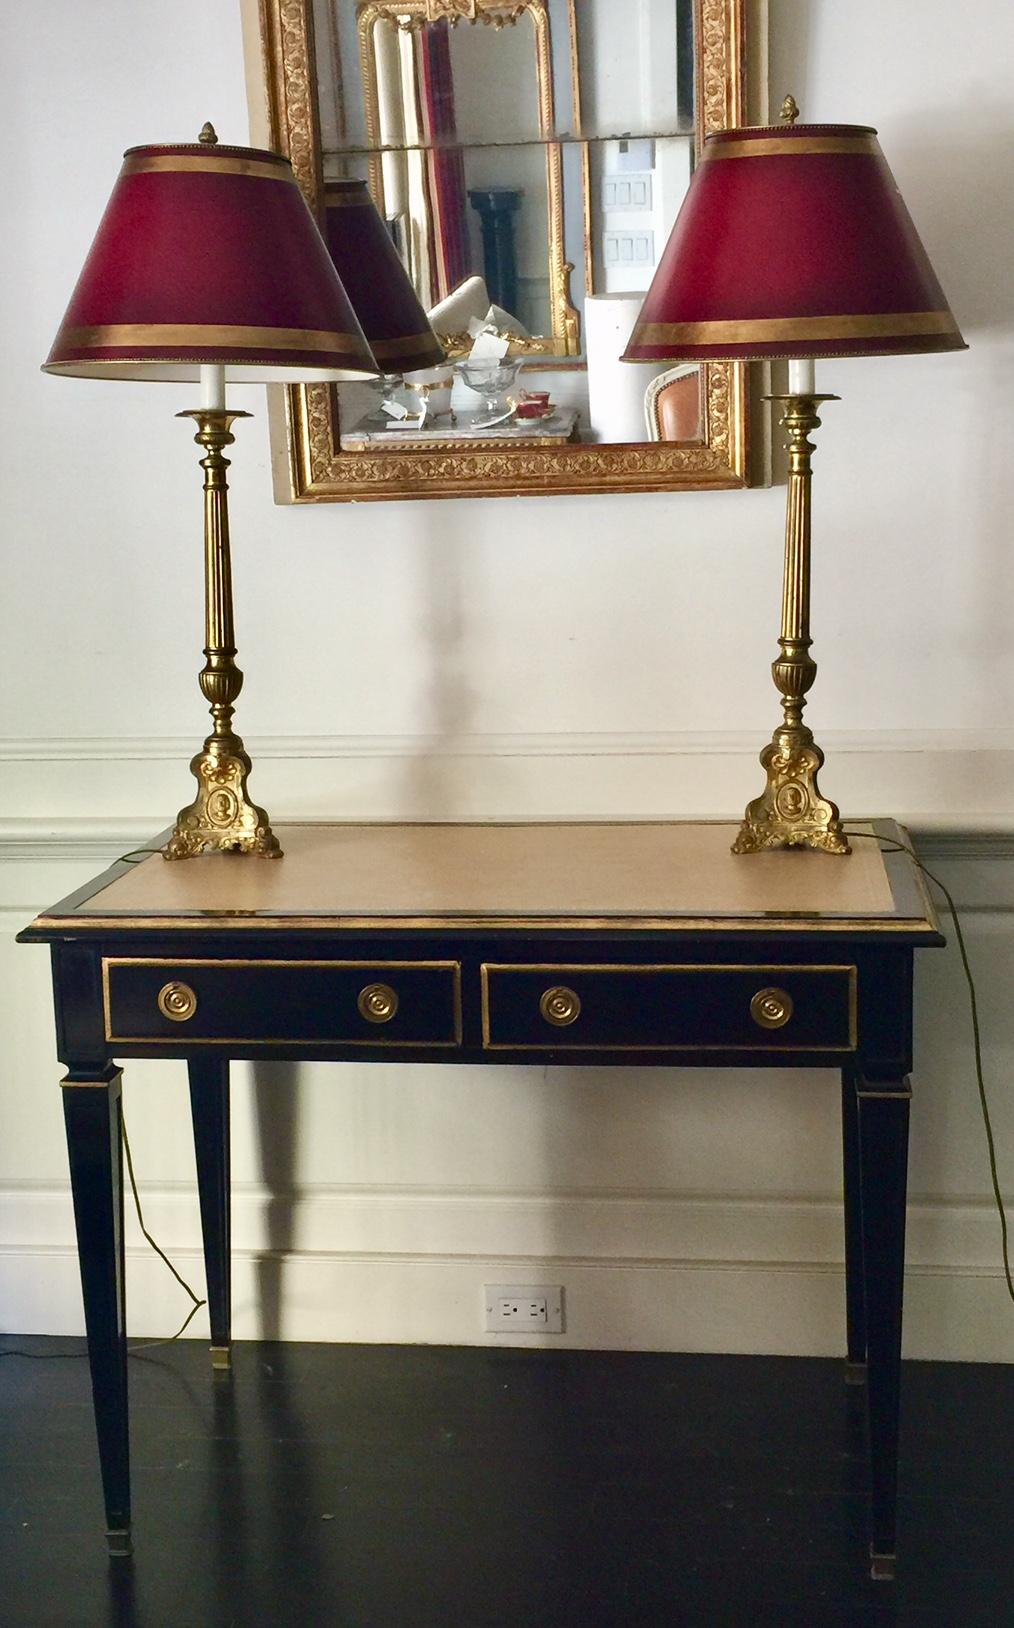 French pair of column lamps with burgundy red parchment shades.
Tall and highly decorative pair of column lamps with burgundy red shades trimmed in wide gold bands. The columns rise from the tripod base decorated with escutcheons, to the acorn